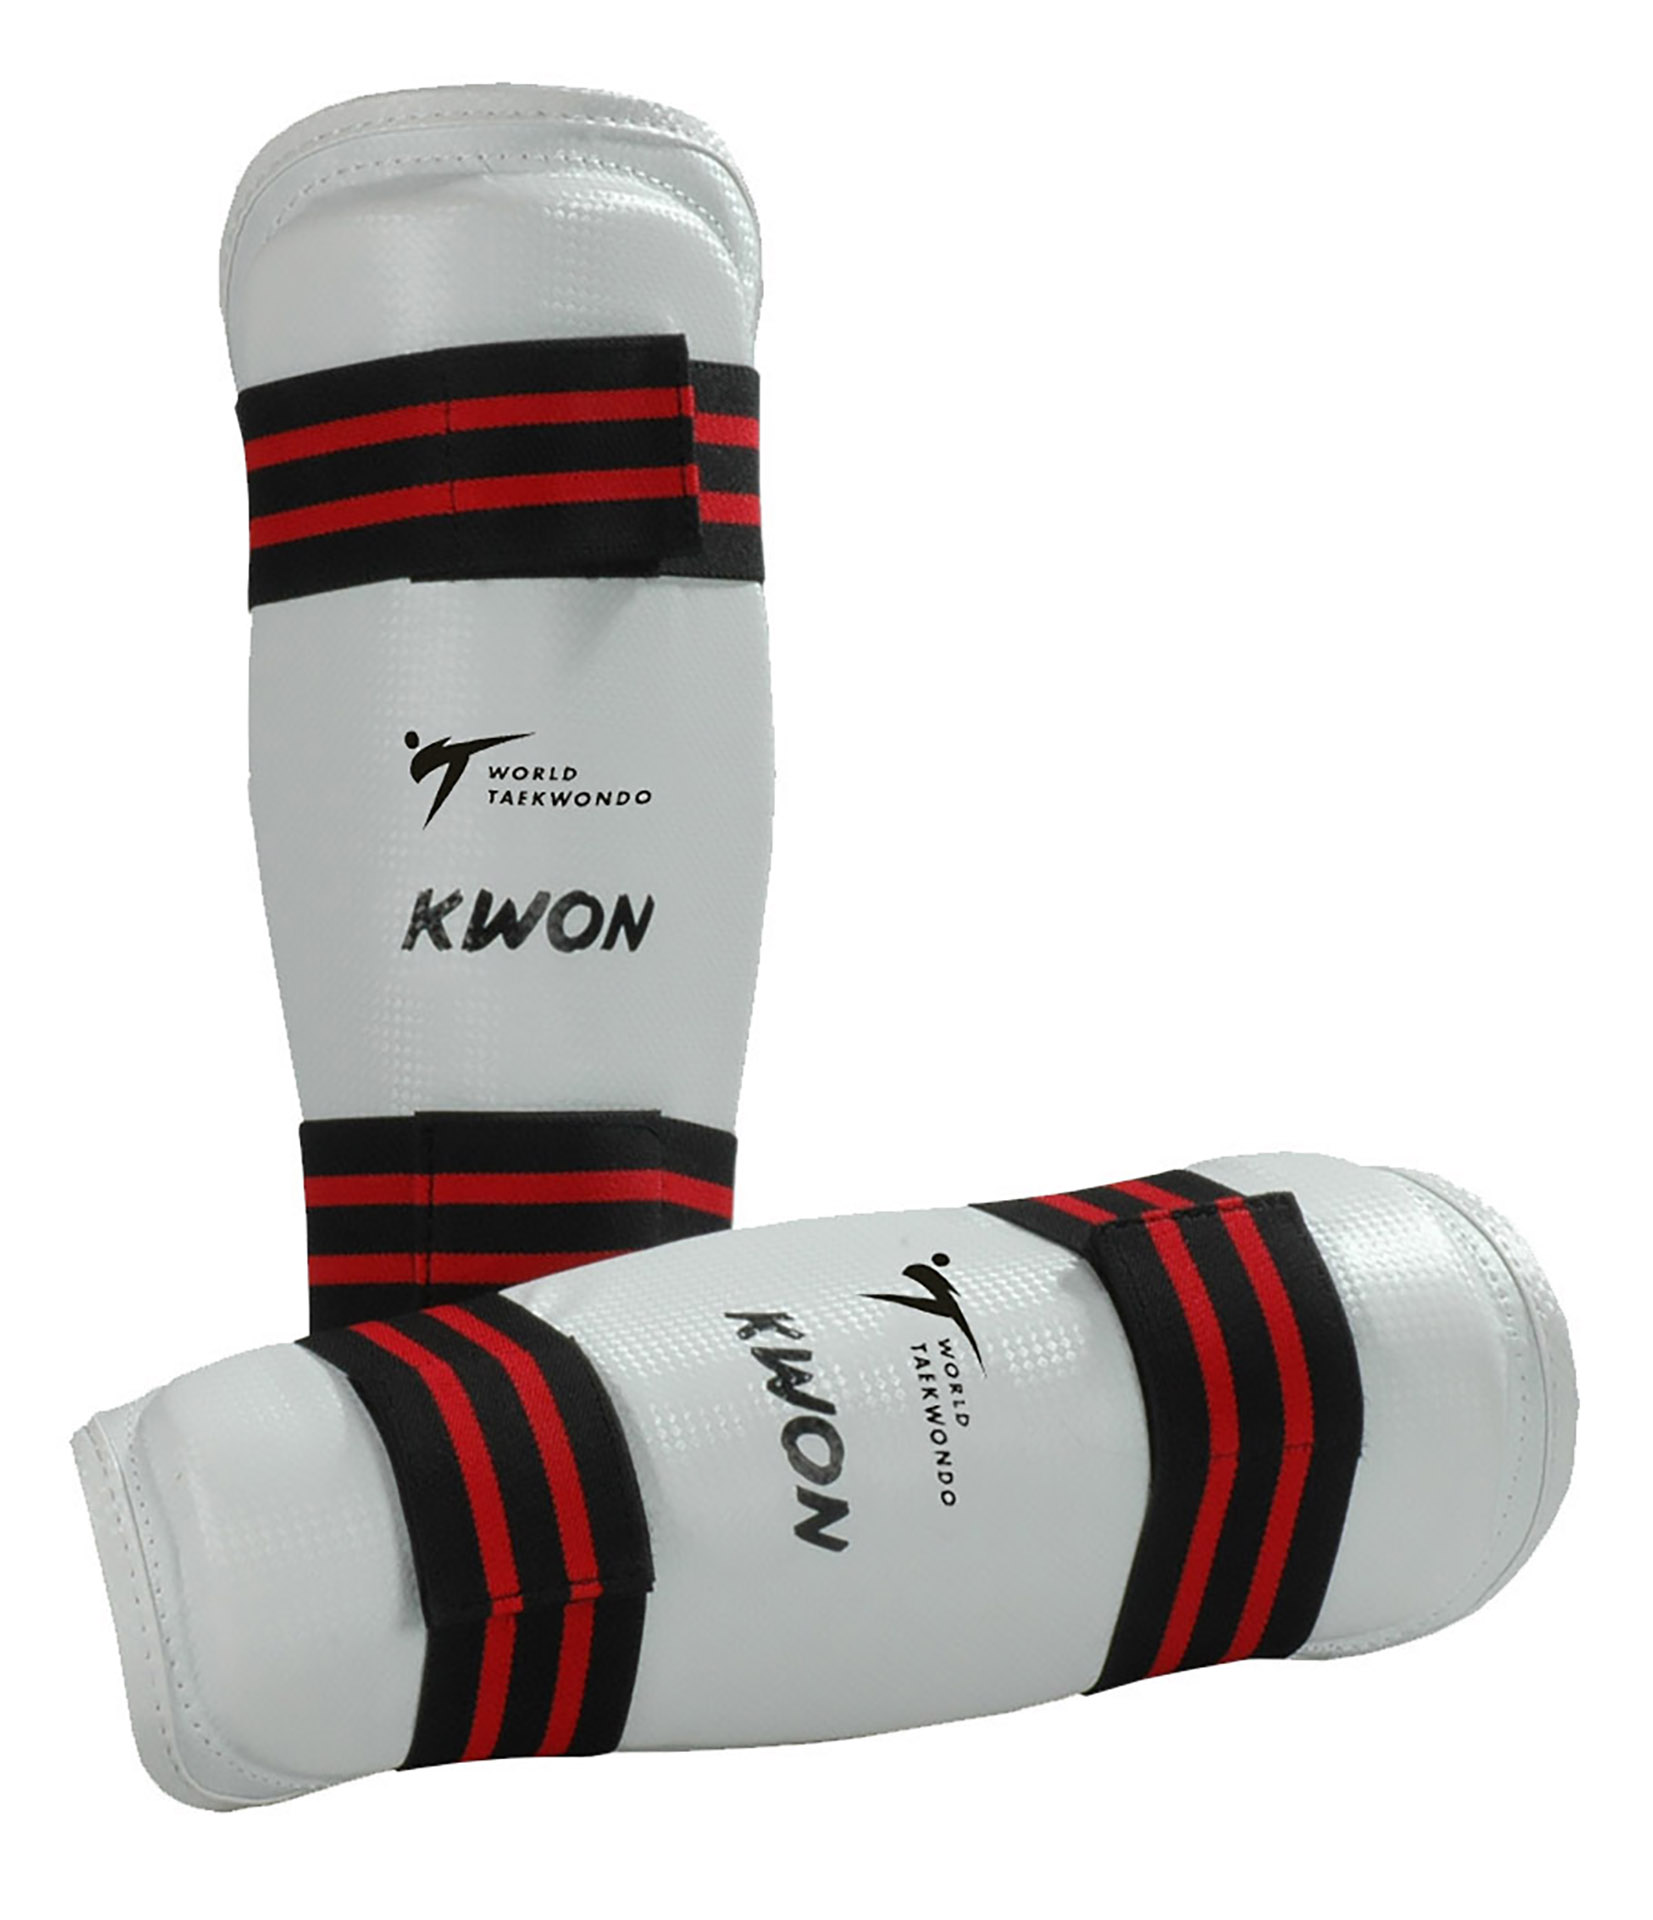 Kwon WT Approved Competition Forearm Guard - £25.99 : Playwell Martial  Arts, The UK's Largest Online Martial Arts Superstore